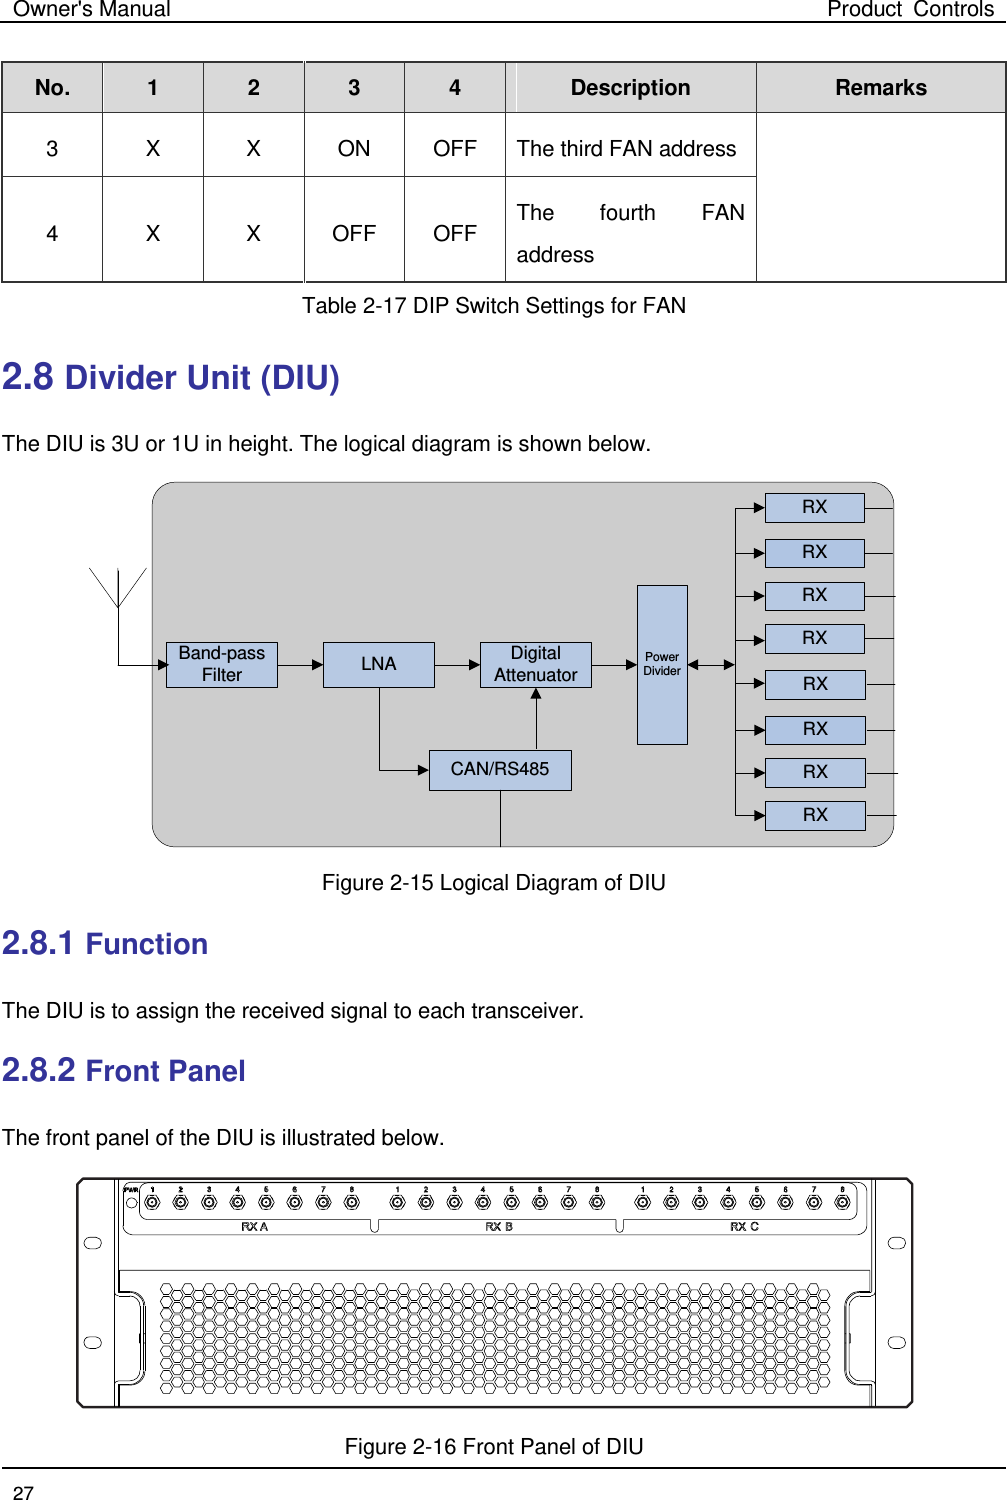 Owner&apos;s Manual Product Controls  27  No.  1  2  3  4  Description Remarks 3  X  X  ON OFF The third FAN address   4  X  X  OFF OFF The fourth FAN address   Table 2-17 DIP Switch Settings for FAN 2.8 Divider Unit (DIU) The DIU is 3U or 1U in height. The logical diagram is shown below. Band-pass Filter LNA Digital AttenuatorPower DividerRXRXRXRXCAN/RS485RXRXRXRX Figure 2-15 Logical Diagram of DIU 2.8.1 Function The DIU is to assign the received signal to each transceiver.   2.8.2 Front Panel The front panel of the DIU is illustrated below.  Figure 2-16 Front Panel of DIU 